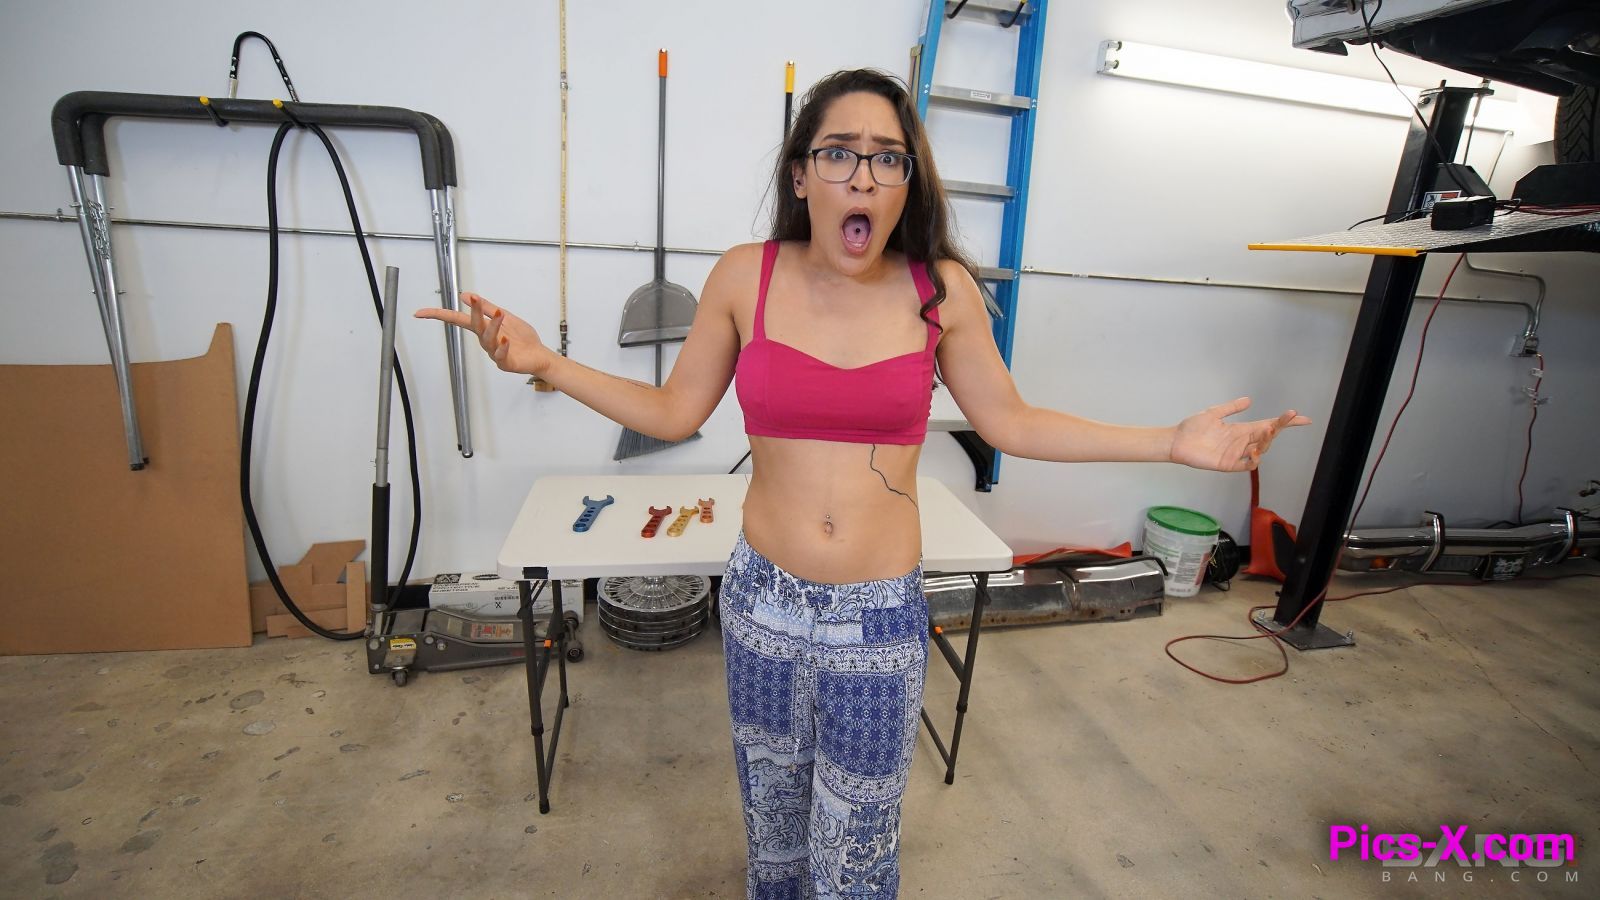 Xaya Lovelle is a hippie chick that will fuck to get her car fixed - Image 32